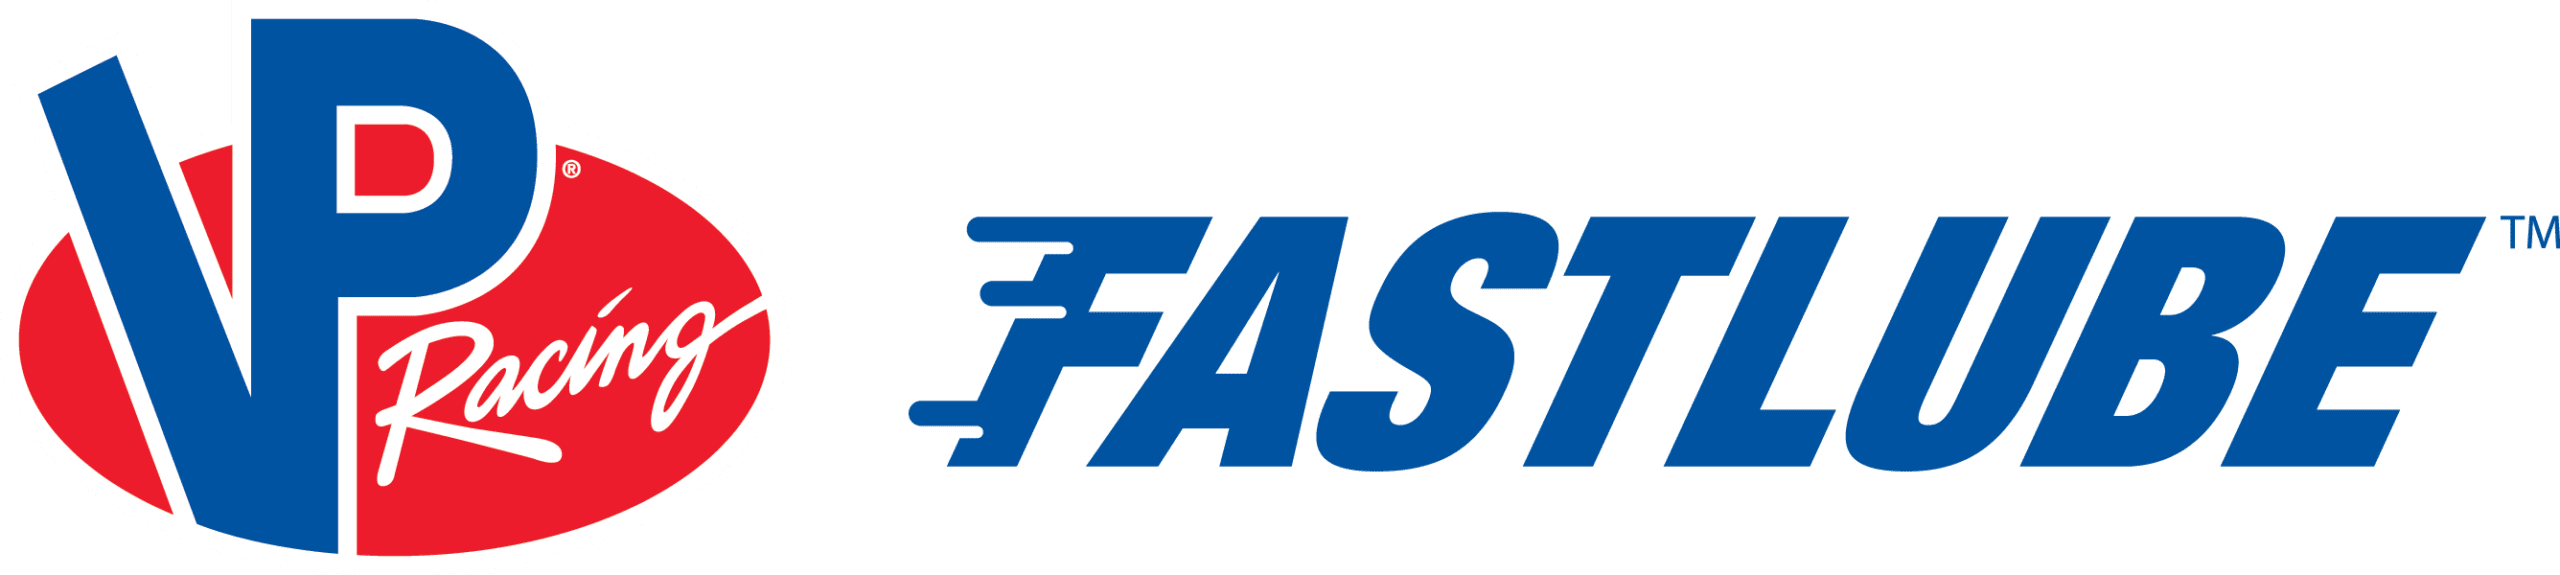 VP LAUNCHES VP FASTLUBE™ OUTLETS